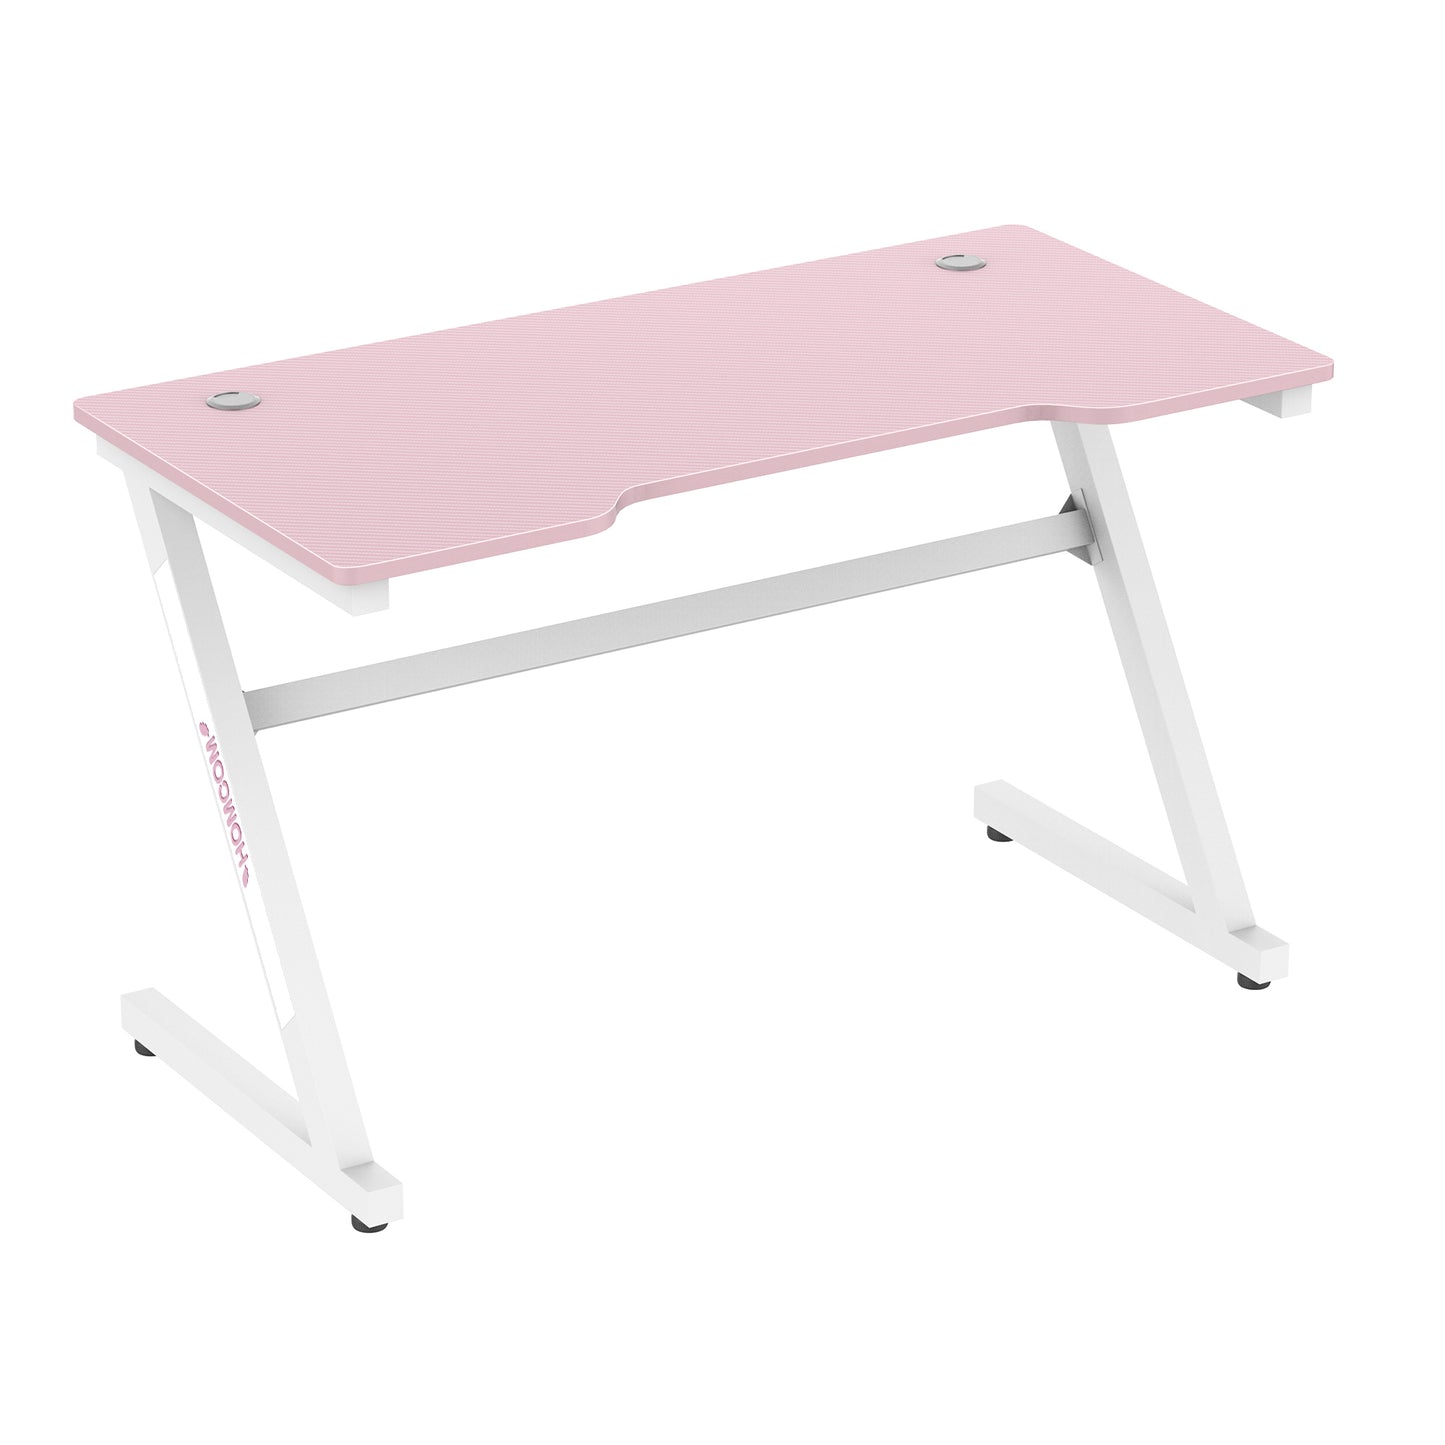 HOMCOM 1.2m Z-Shaped Racing Style Gaming Desk w/ Cable Managenent Home Office Pink